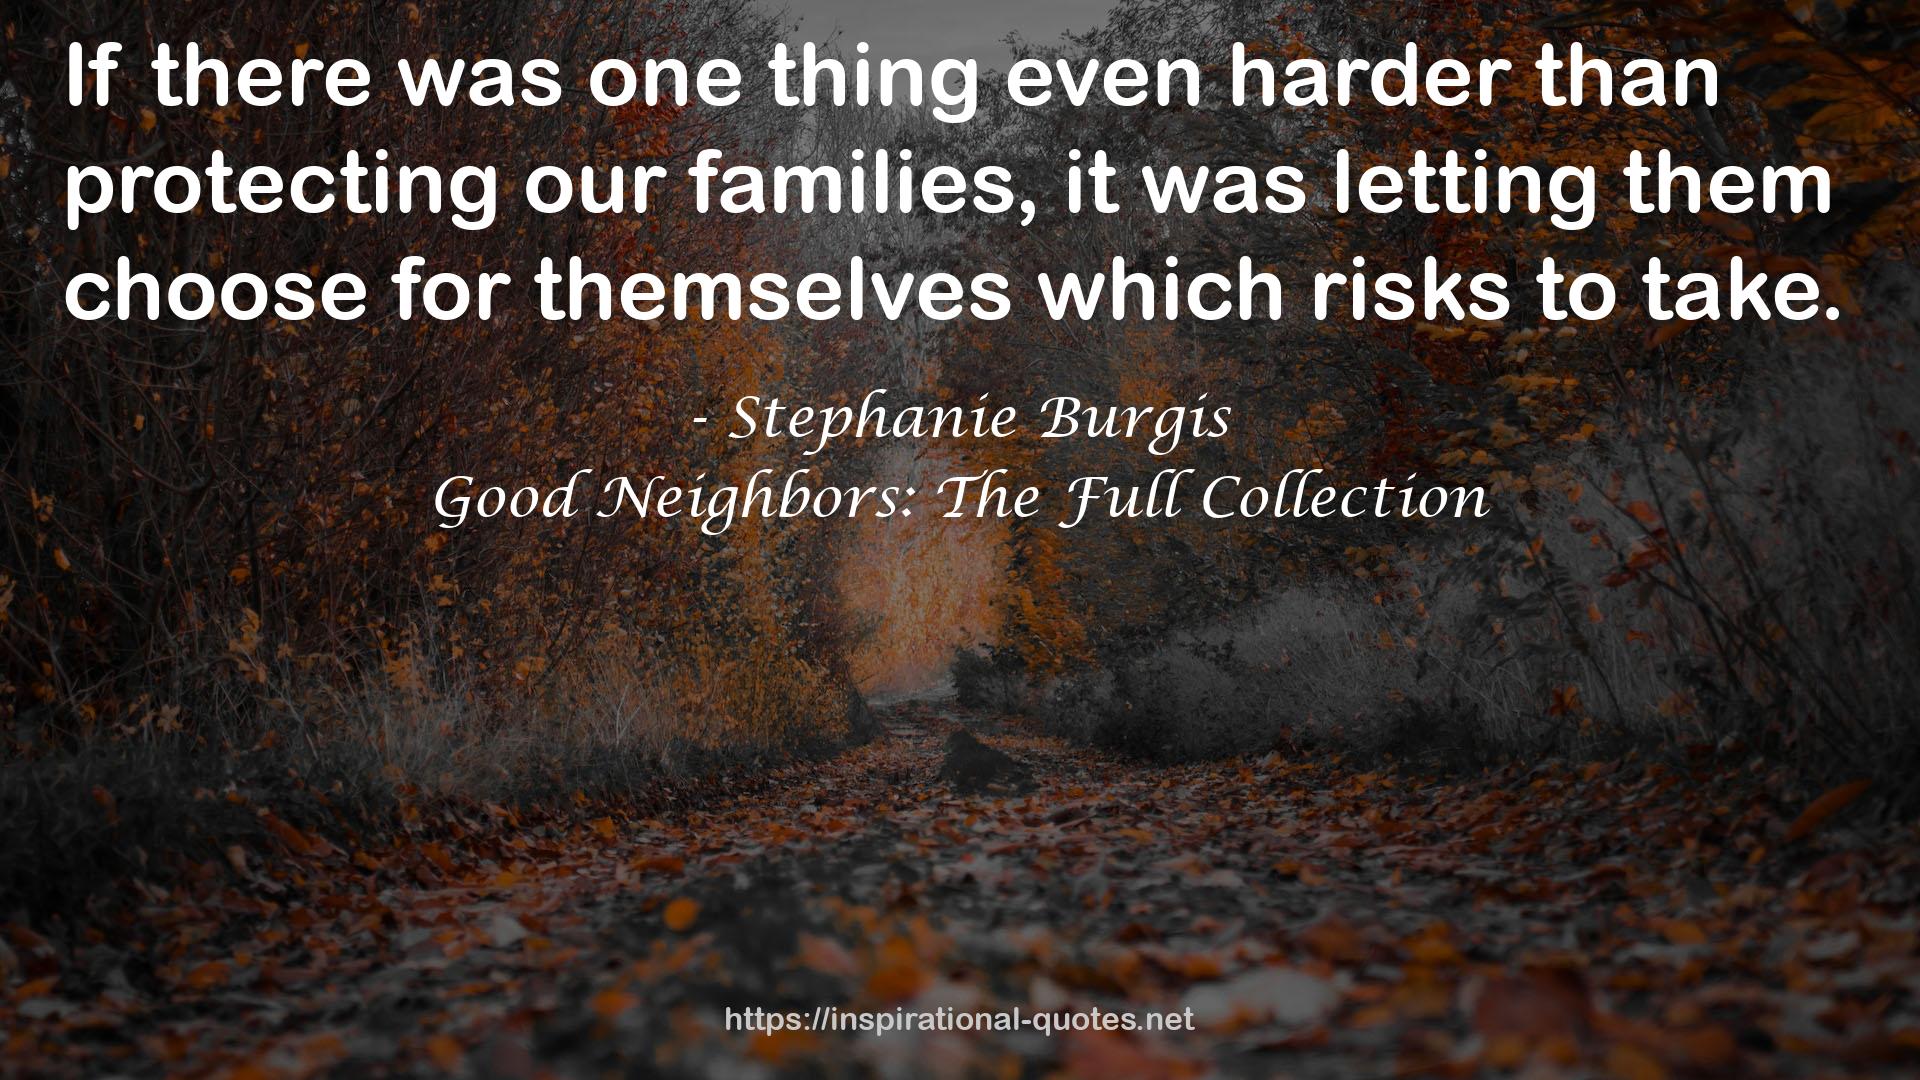 Good Neighbors: The Full Collection QUOTES